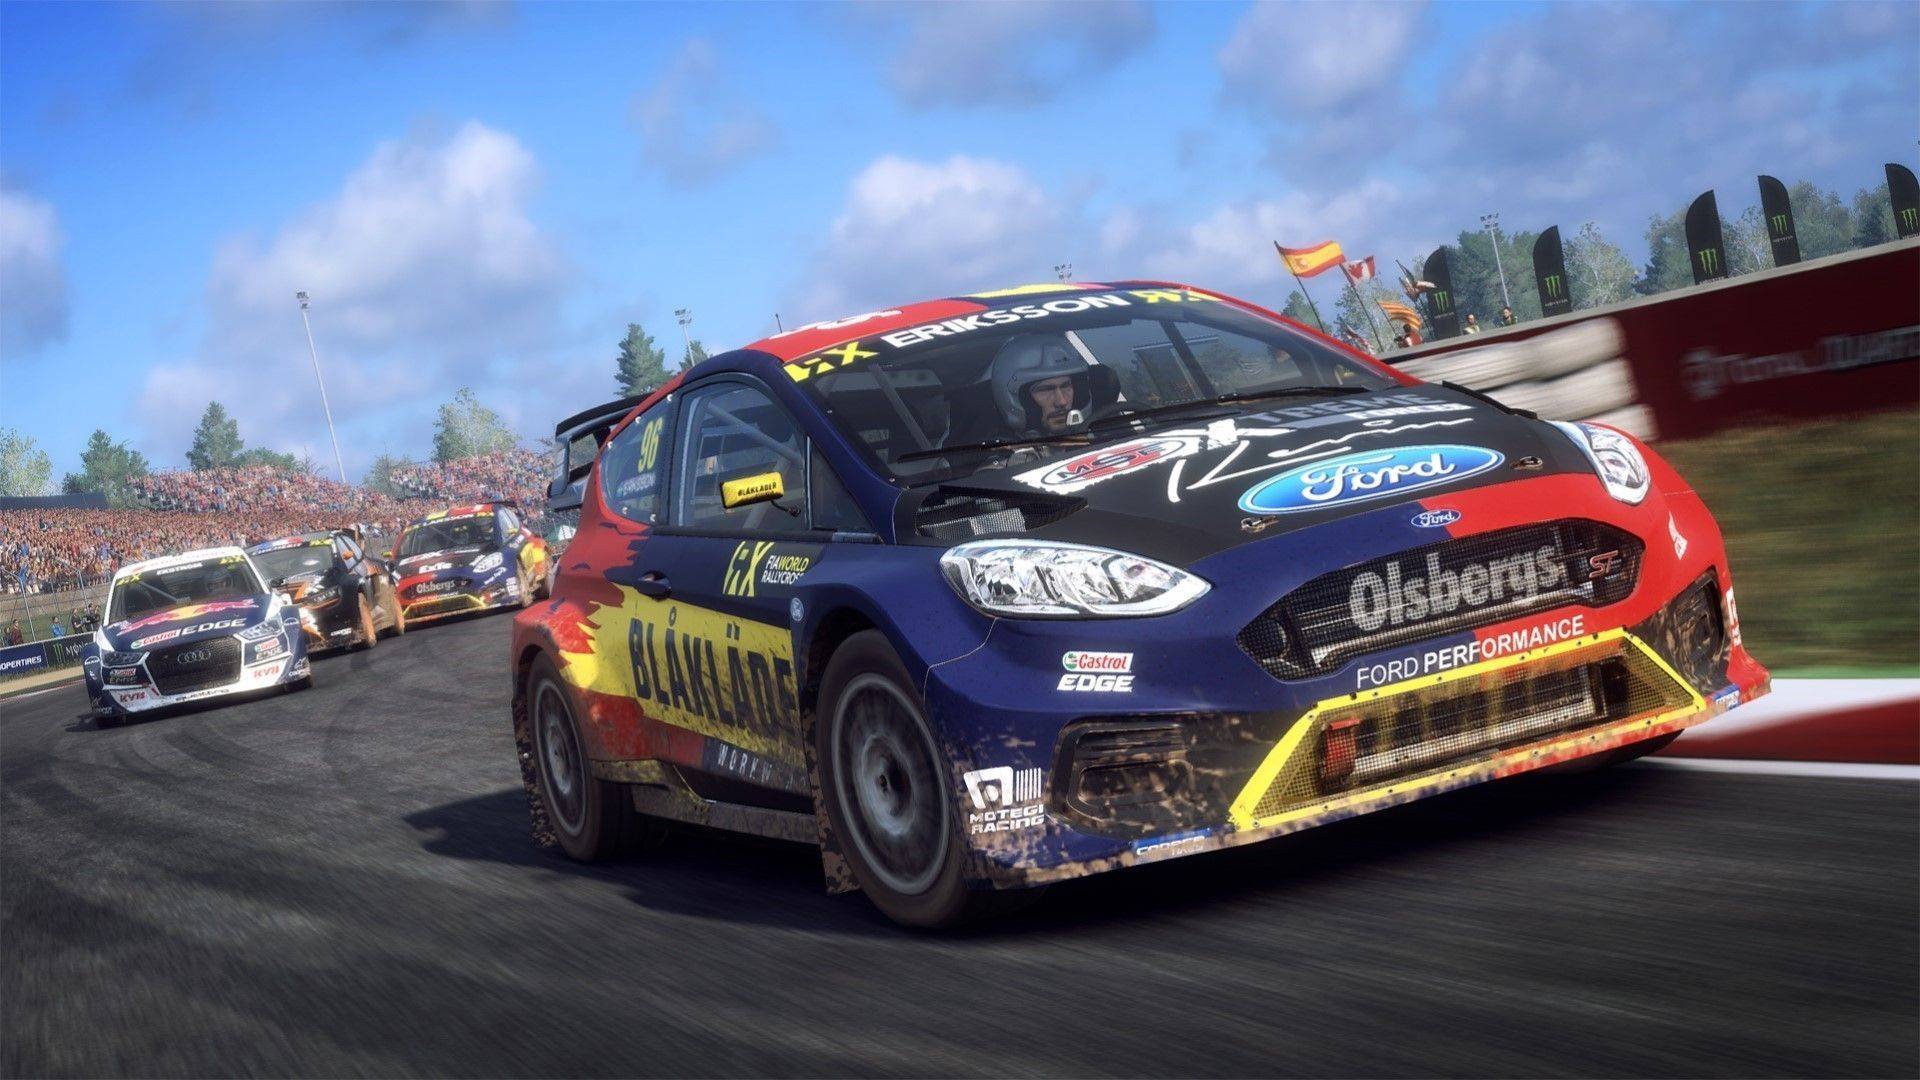 https://static.wikia.nocookie.net/cmr/images/d/df/DirtRally2_FiestaRXmk8_Barcelona_1.jpg/revision/latest?cb=20200129075137